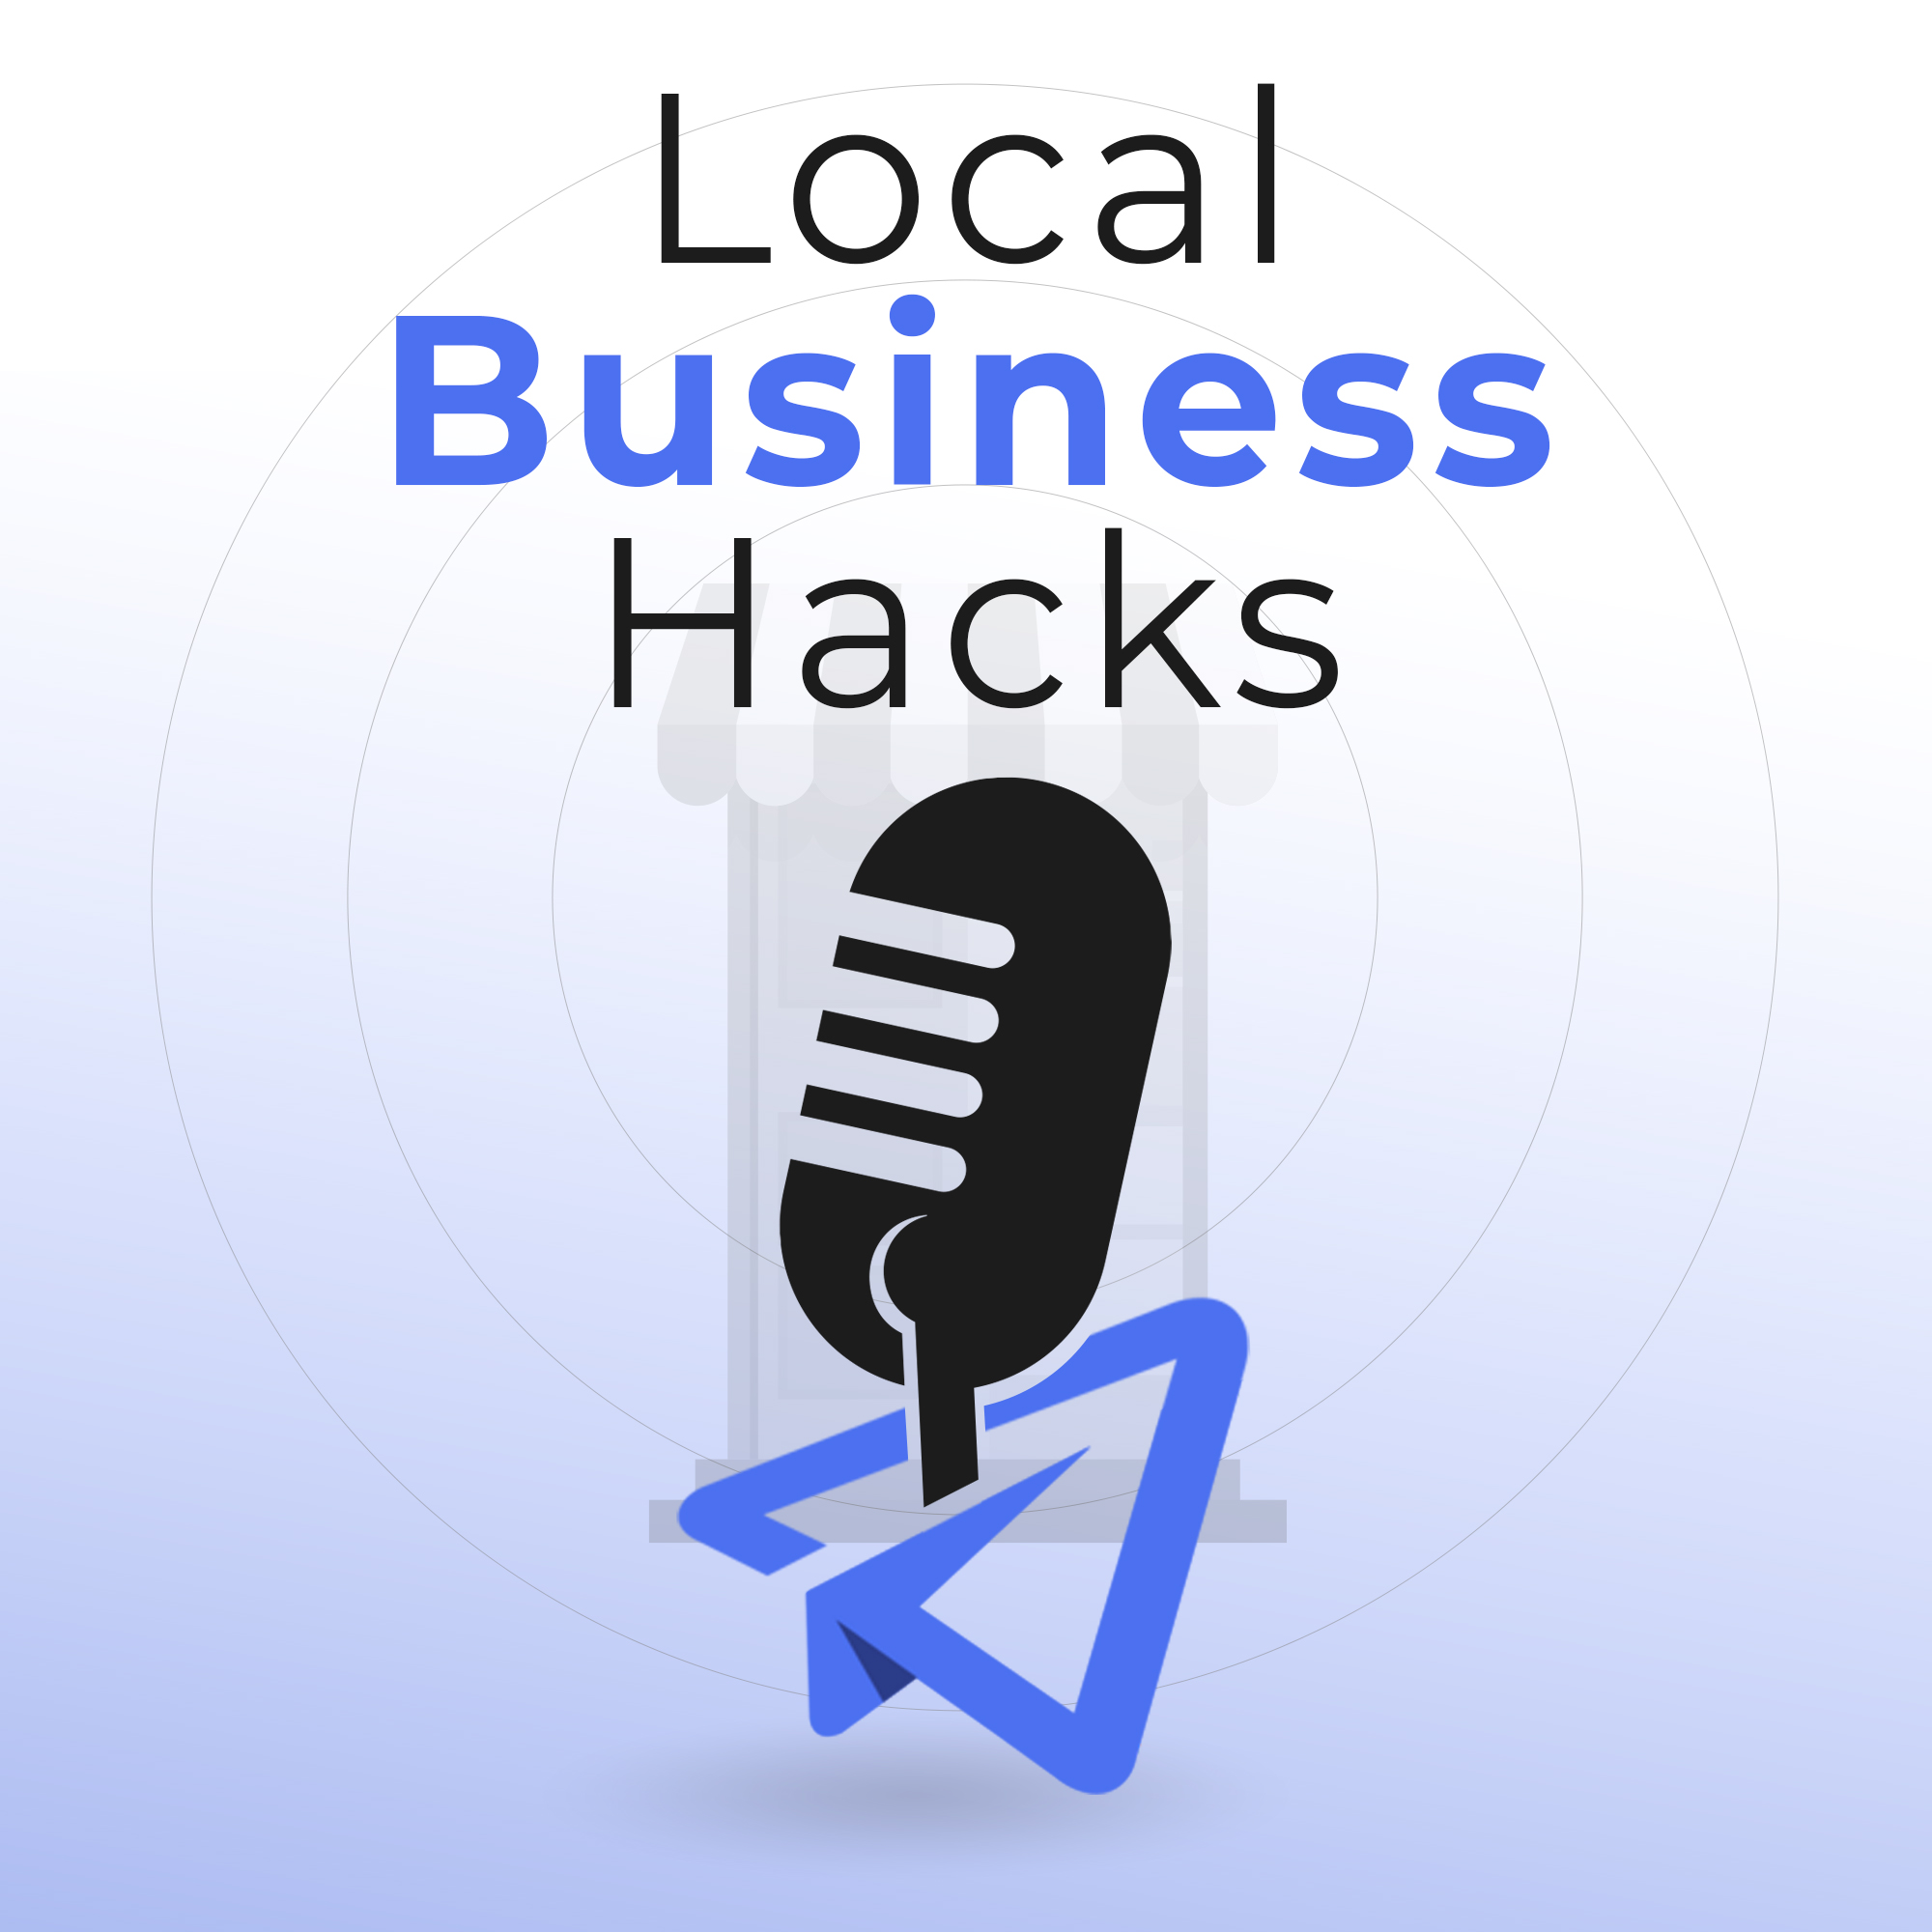 Van Wye Shares His Vision on Local Business Hacks Podcast